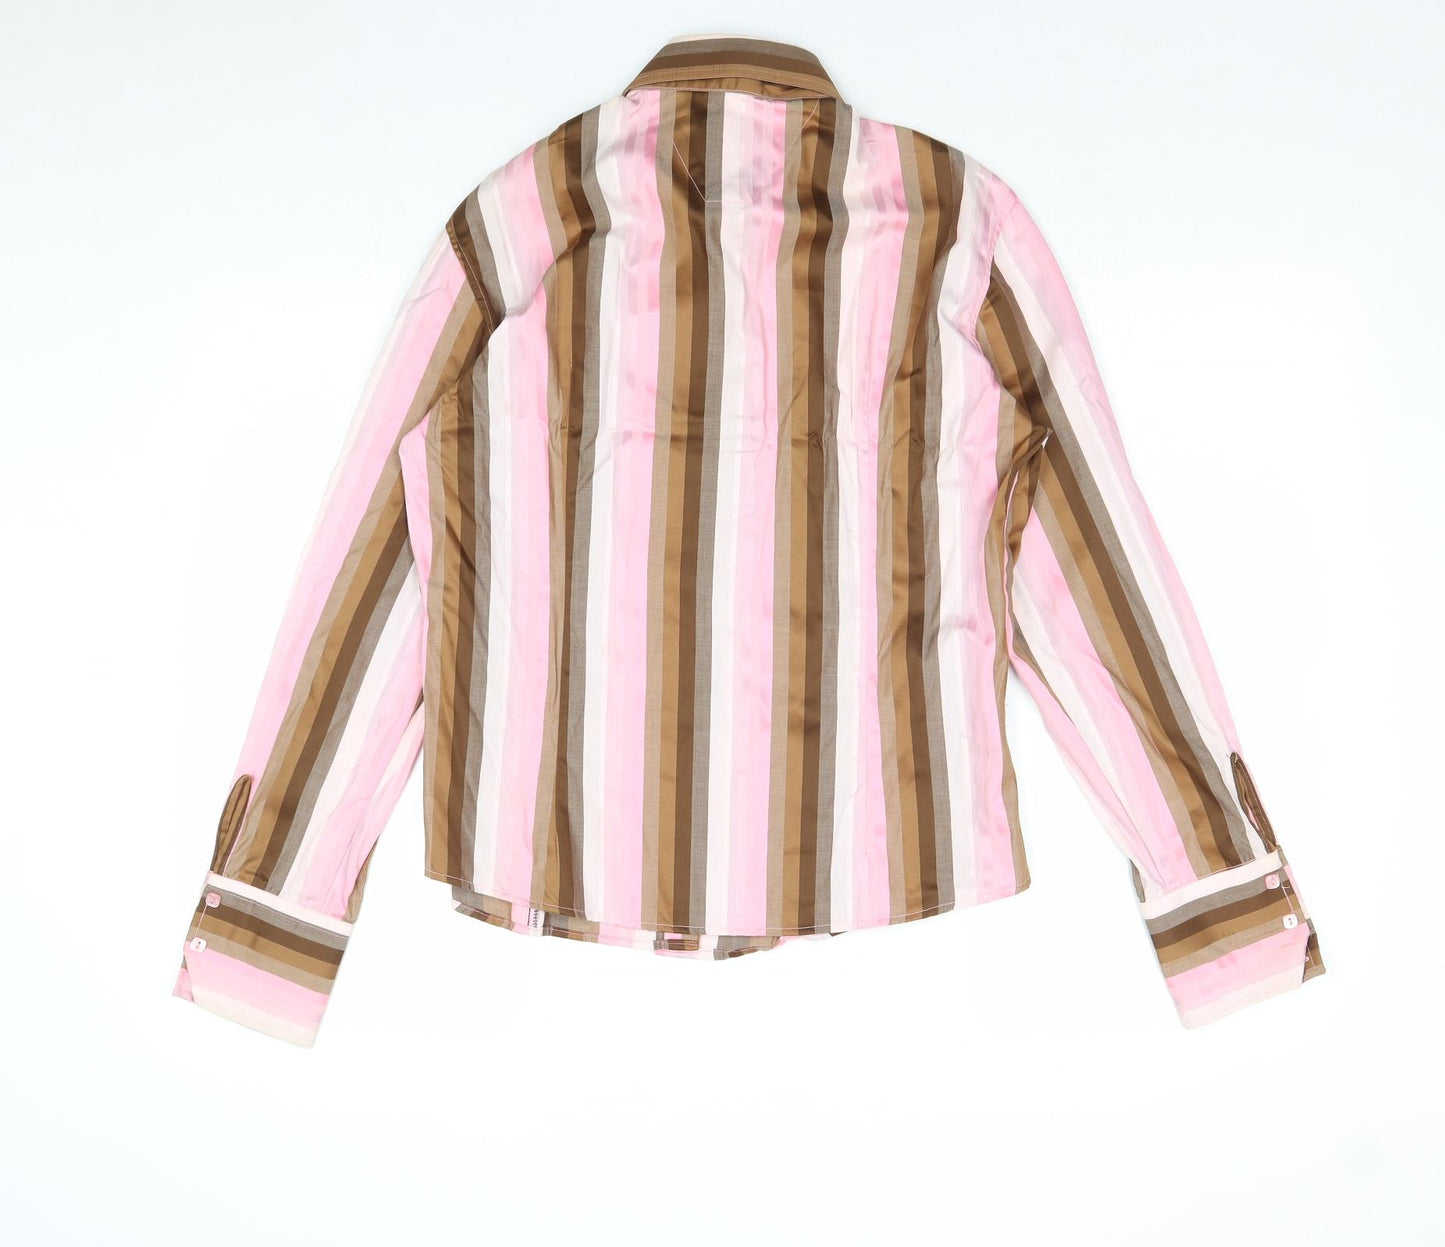 Alessandro Mens Pink Striped 100% Cotton Dress Shirt Size M Collared Button